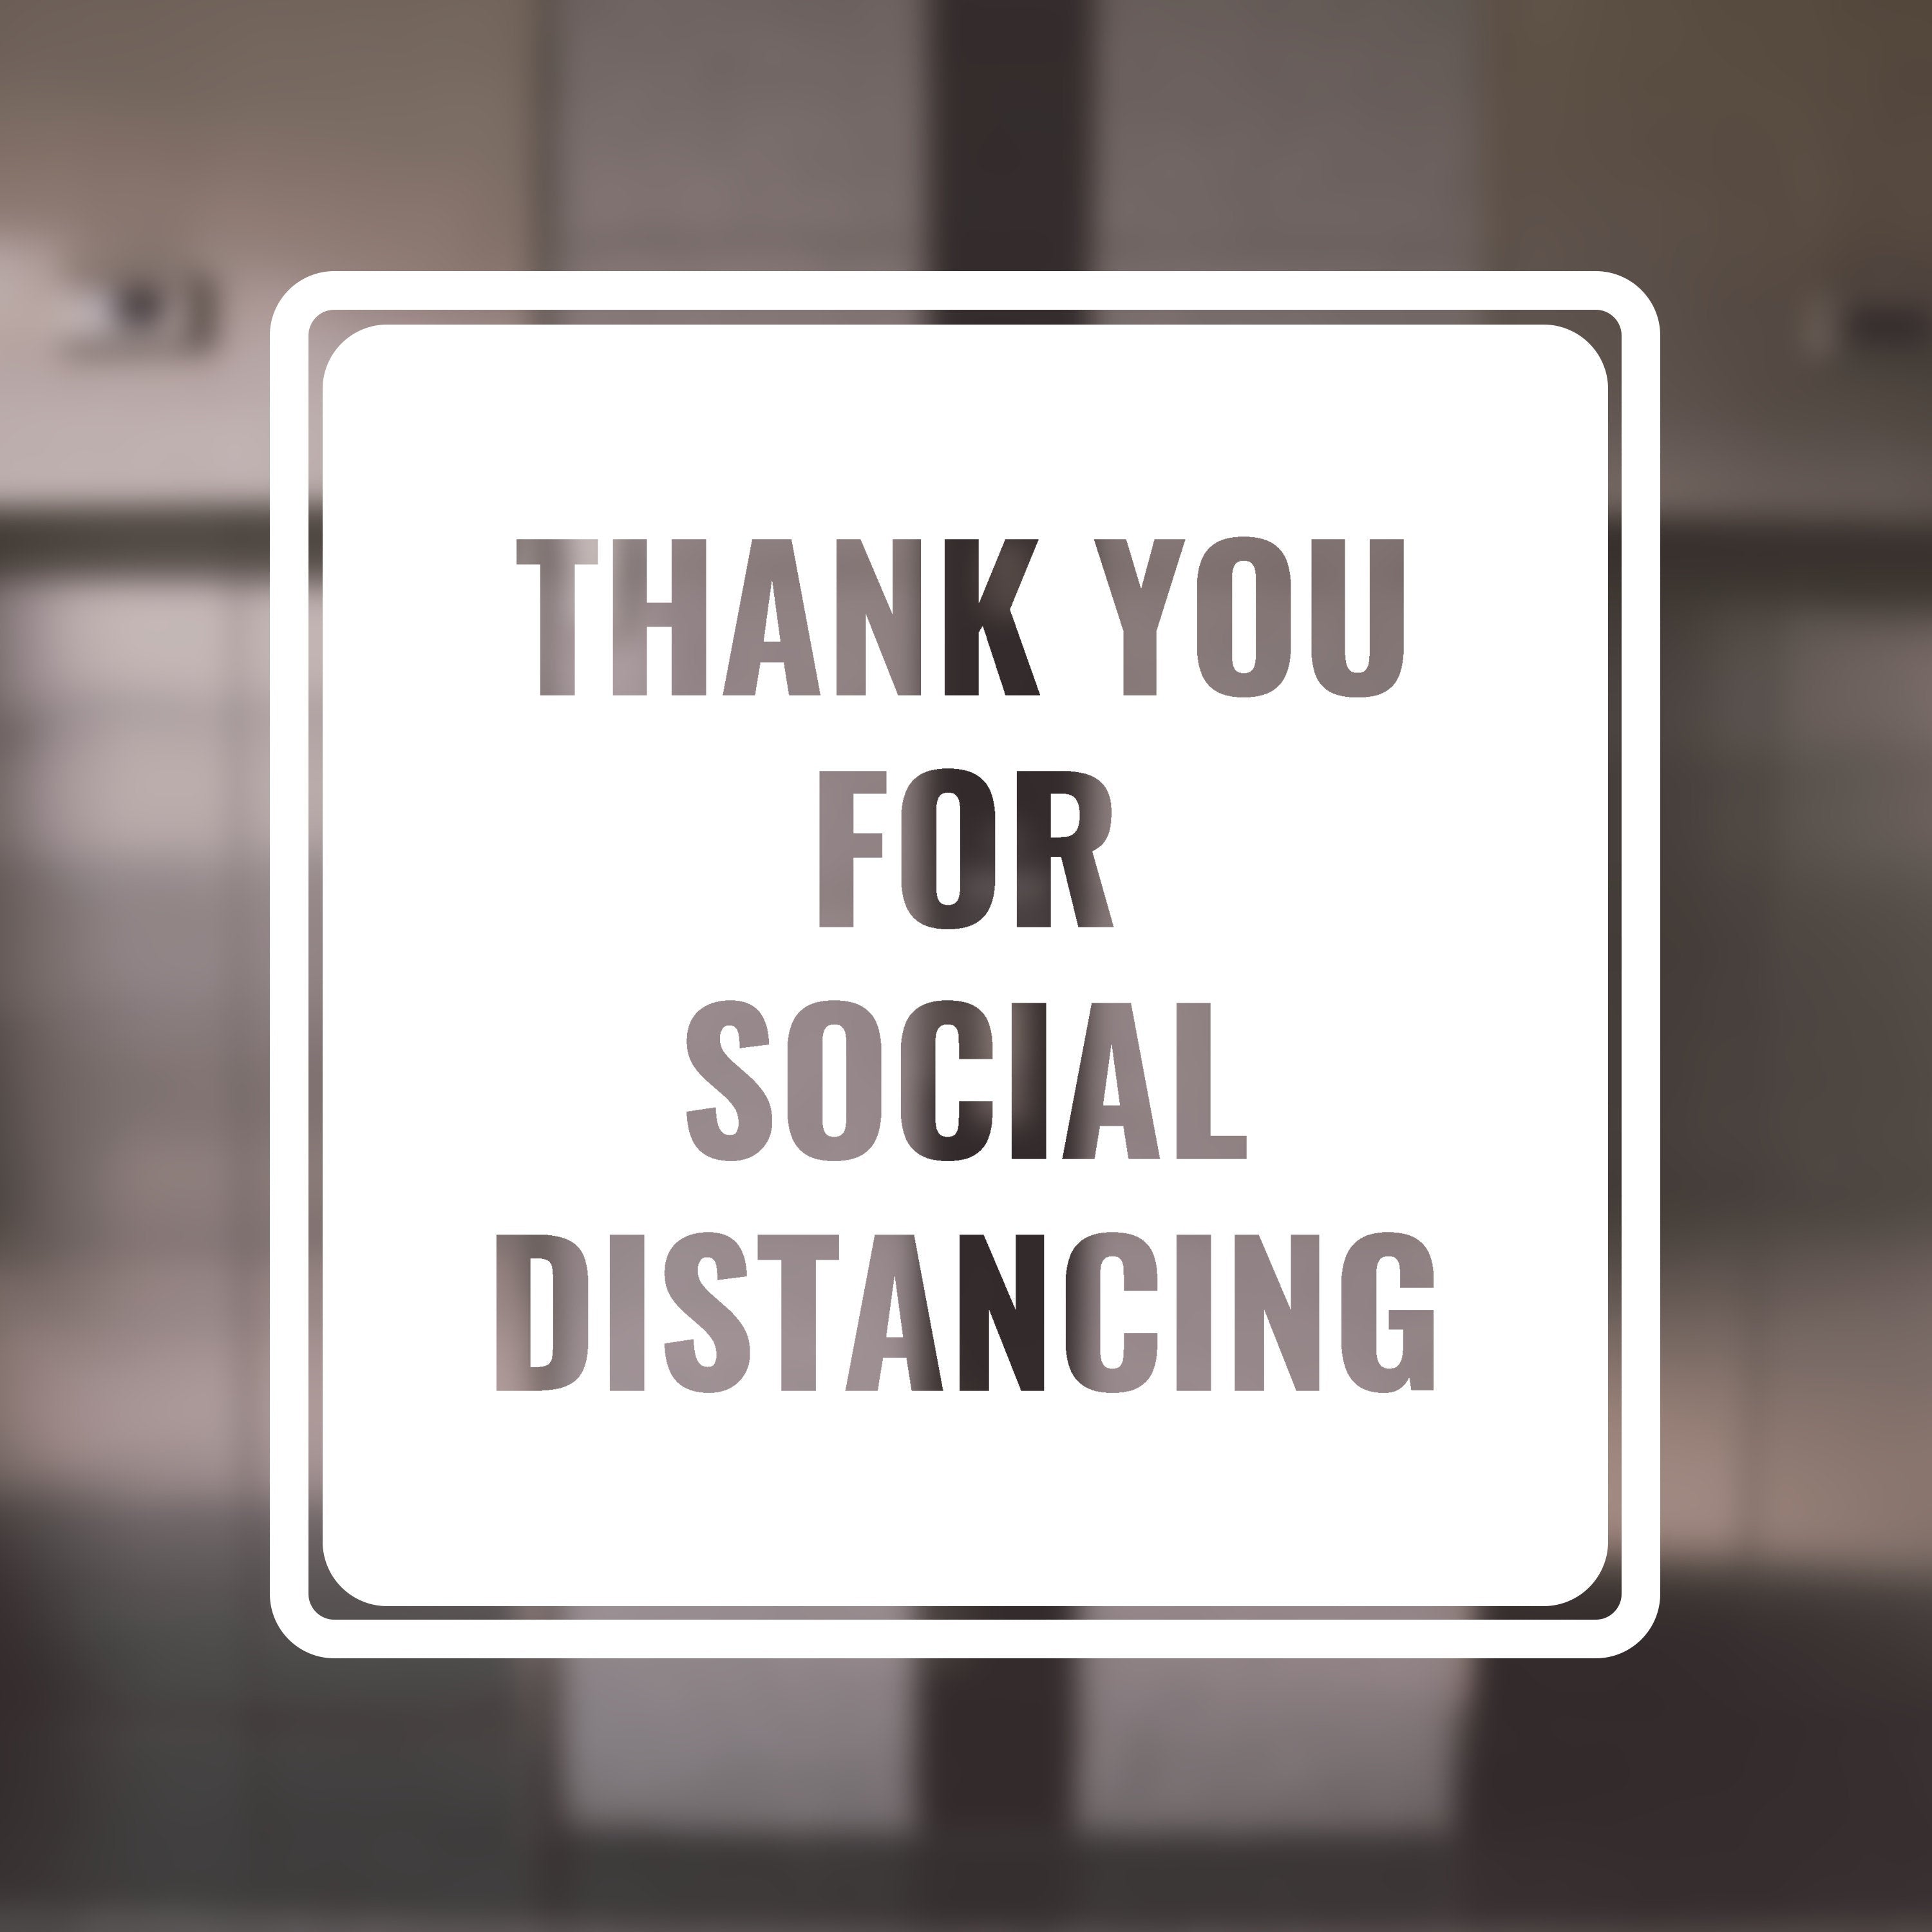 Square Thank You for Social Distancing Sign - Vinyl Decal for Windows, Doors, Glass for Businesses, Stores, Shops, Restaurants, and More!